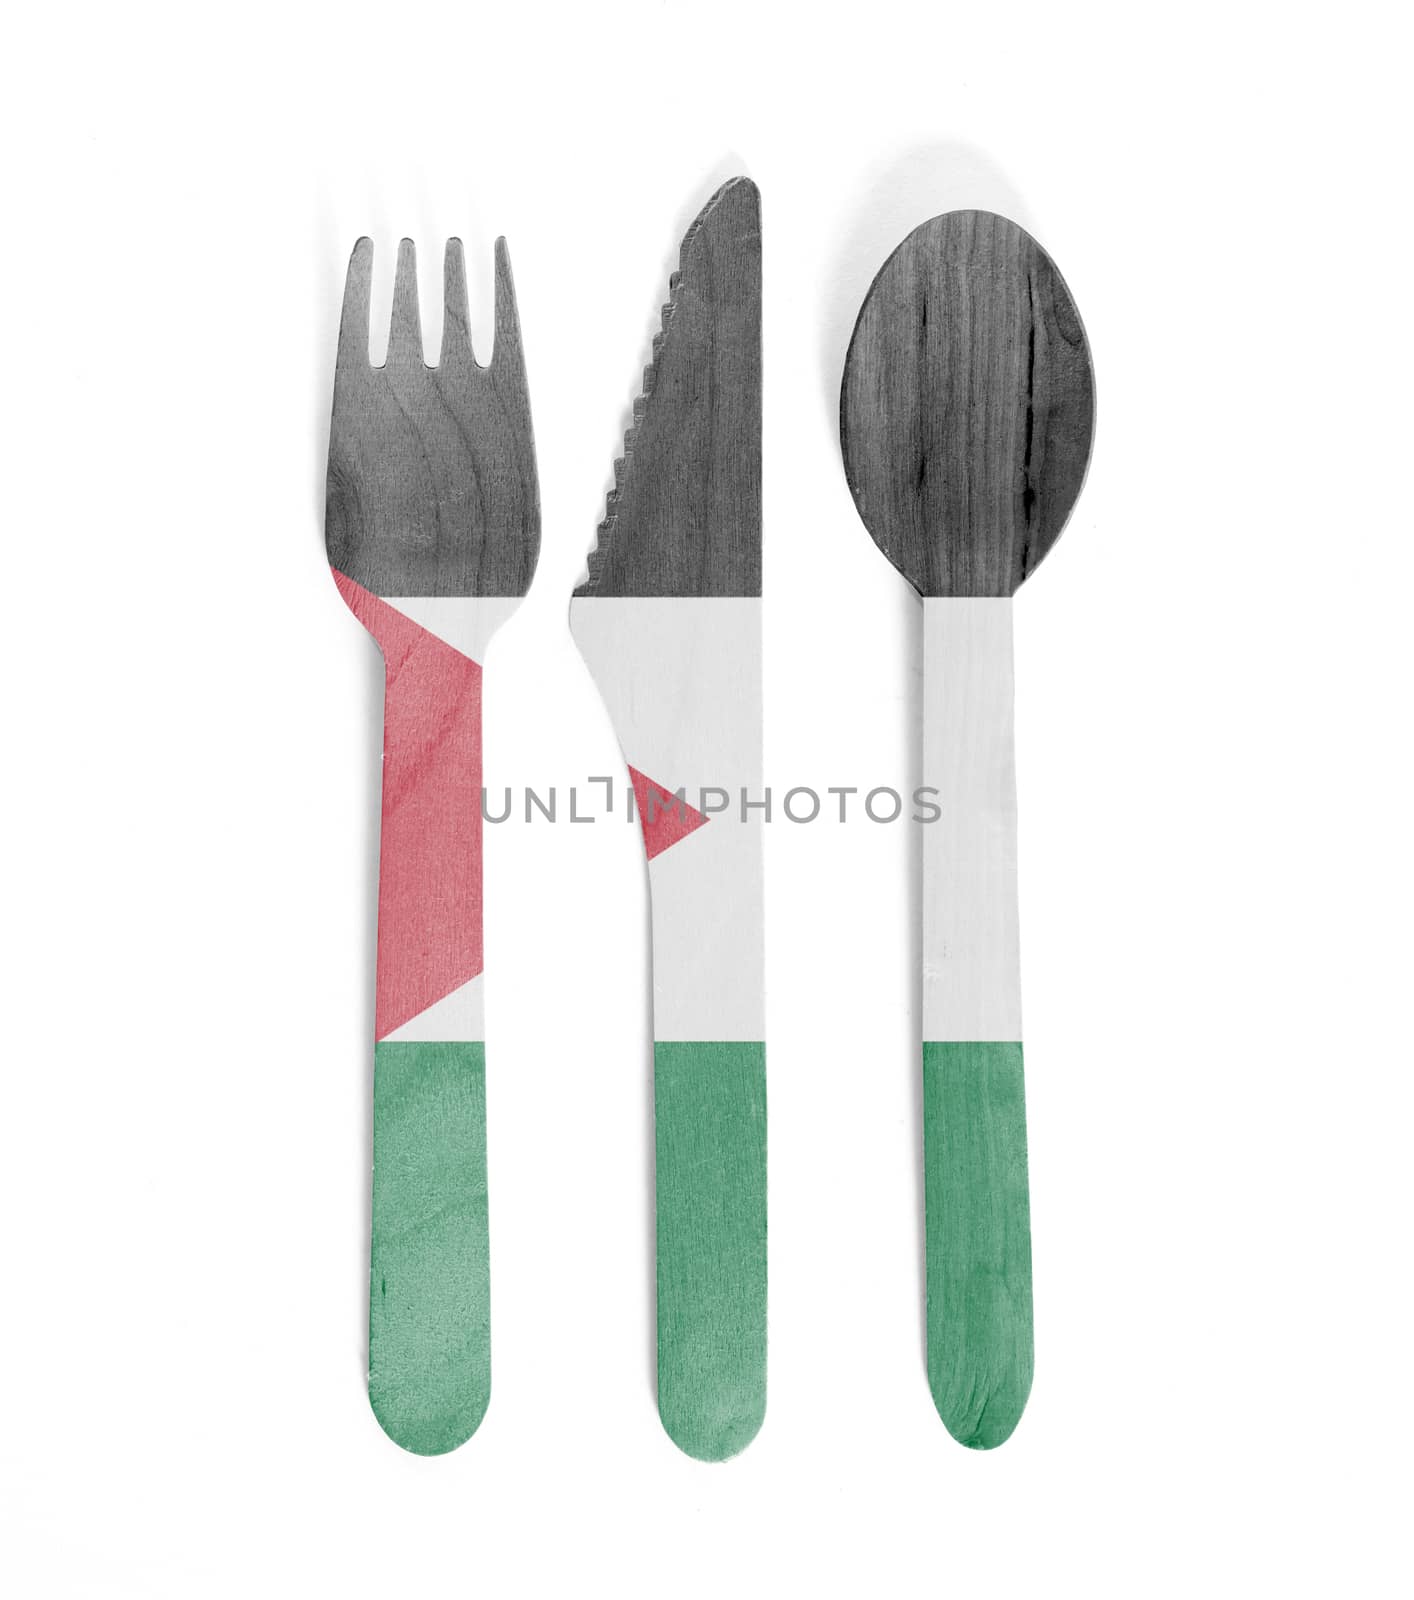 Eco friendly wooden cutlery - Plastic free concept - Flag of Jor by michaklootwijk